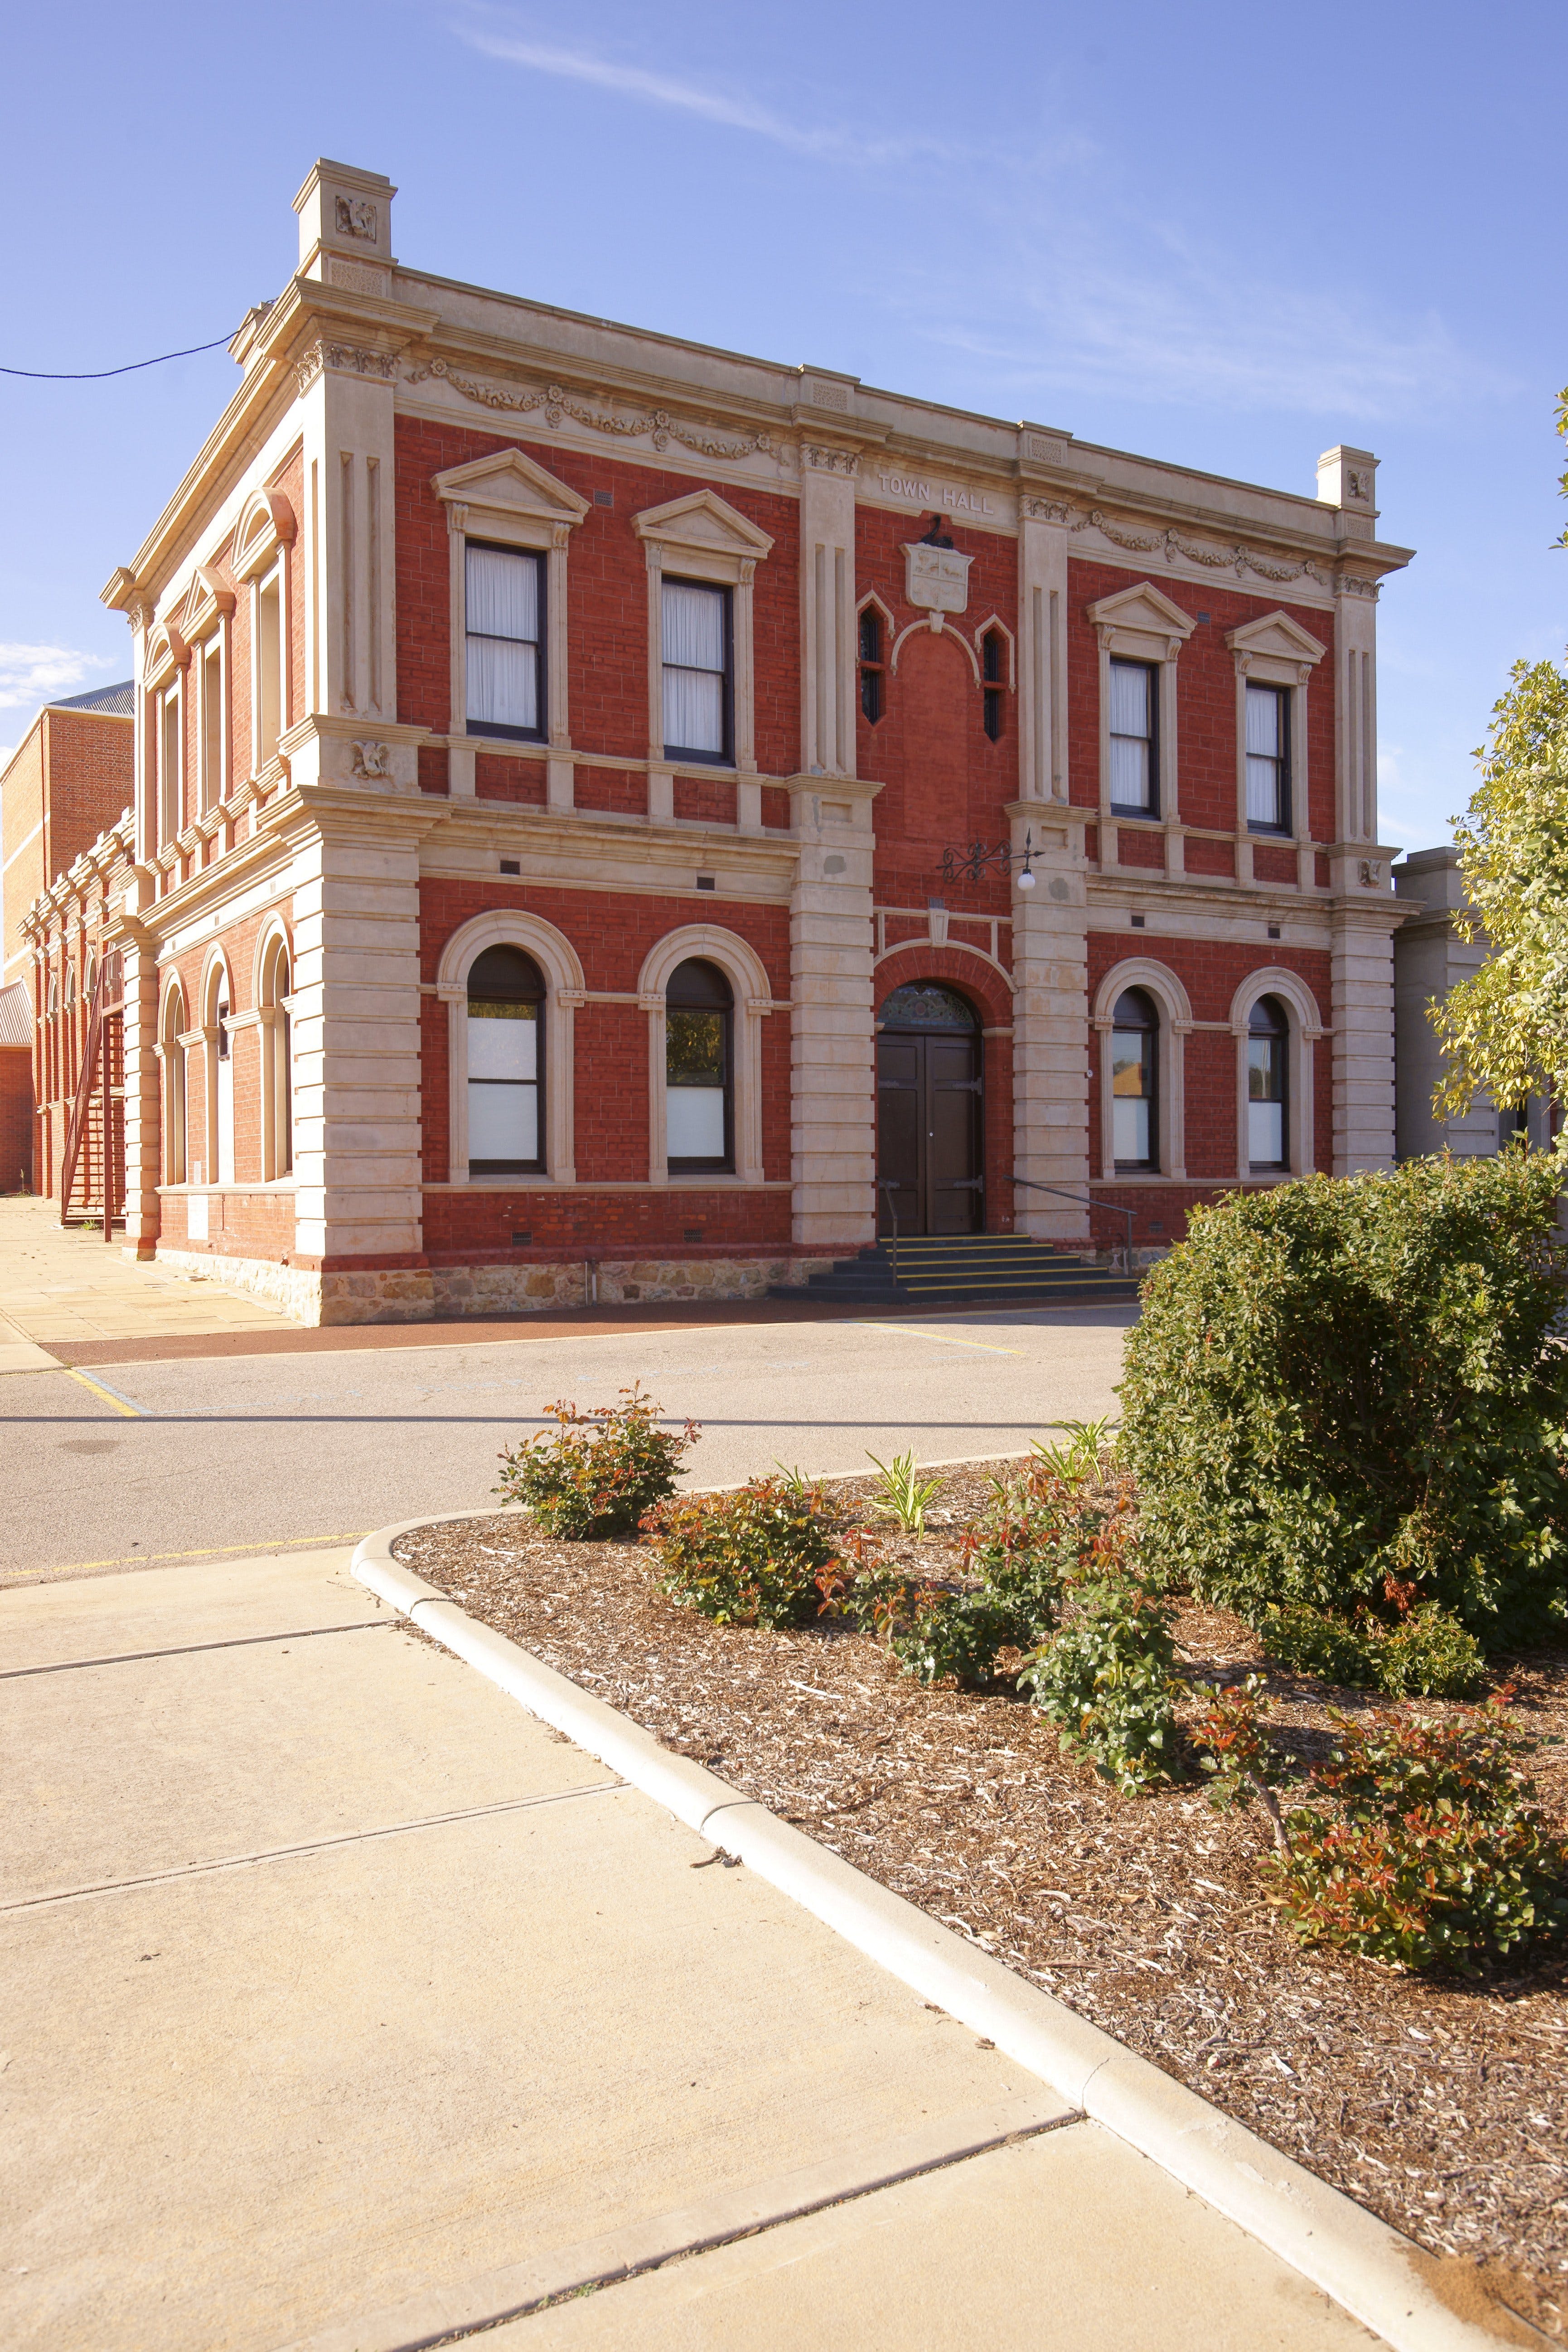 Northam Town Hall - Tourism Cairns